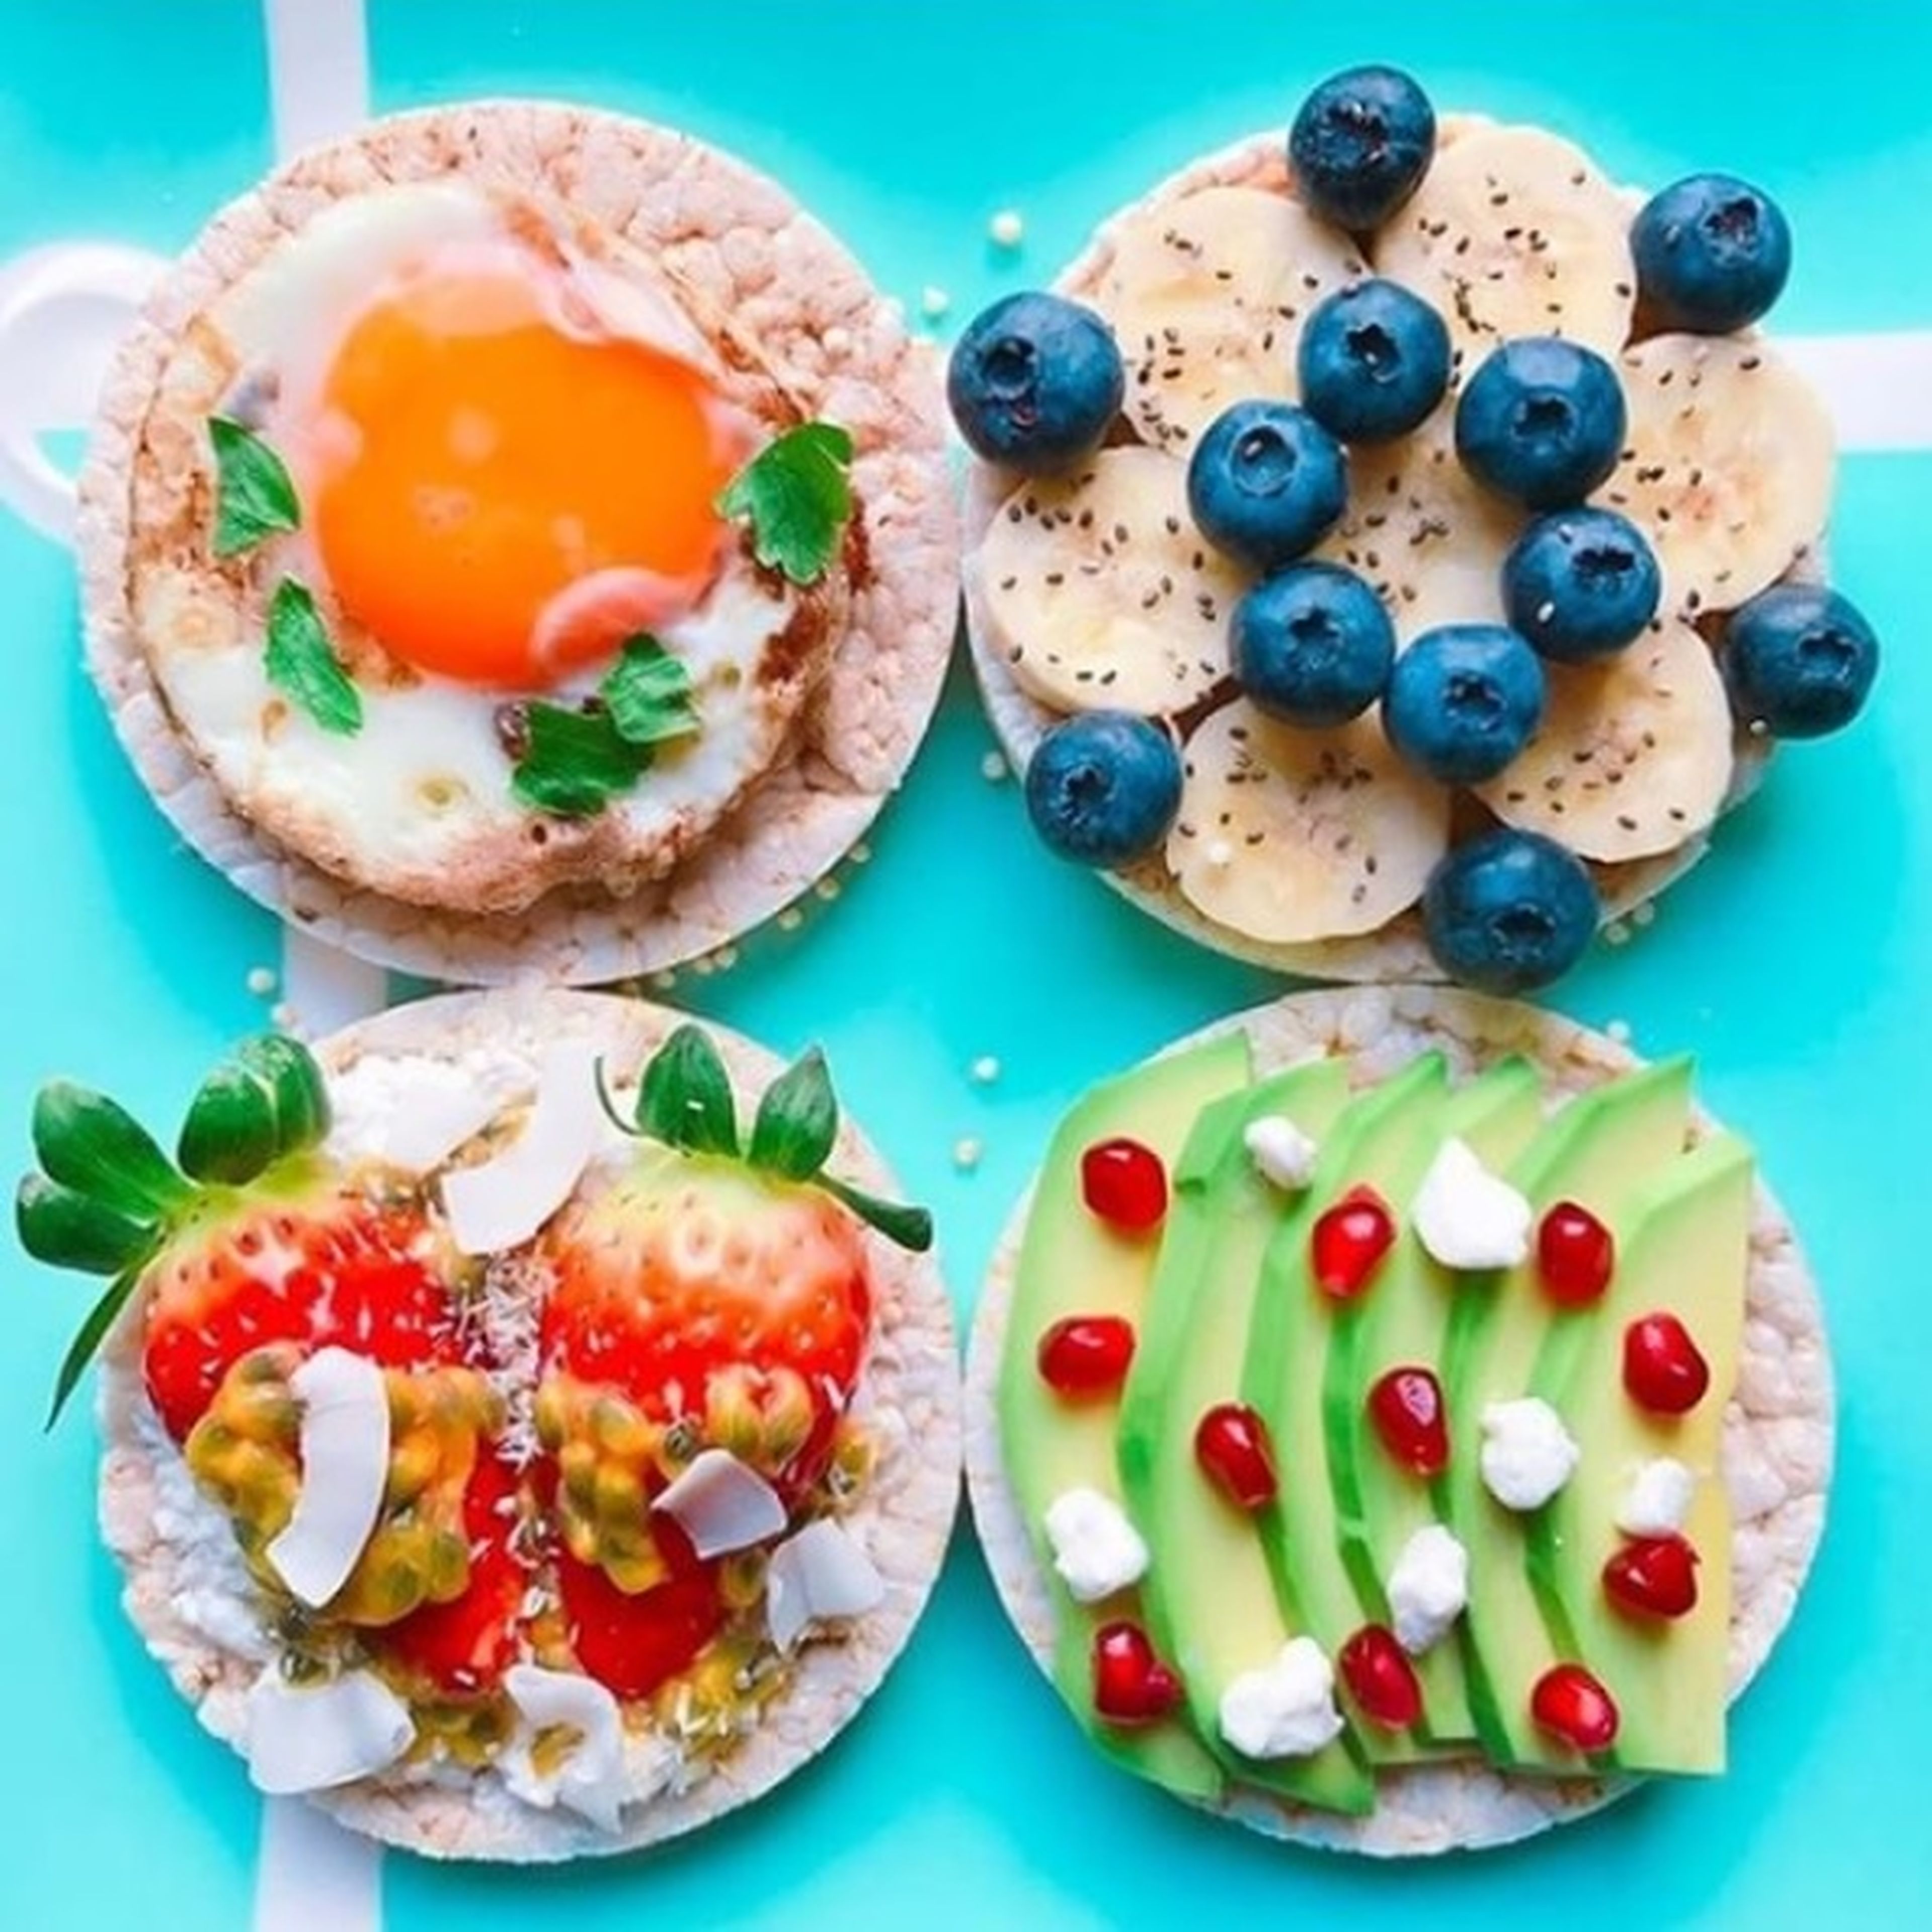 Rice cakes with fruit